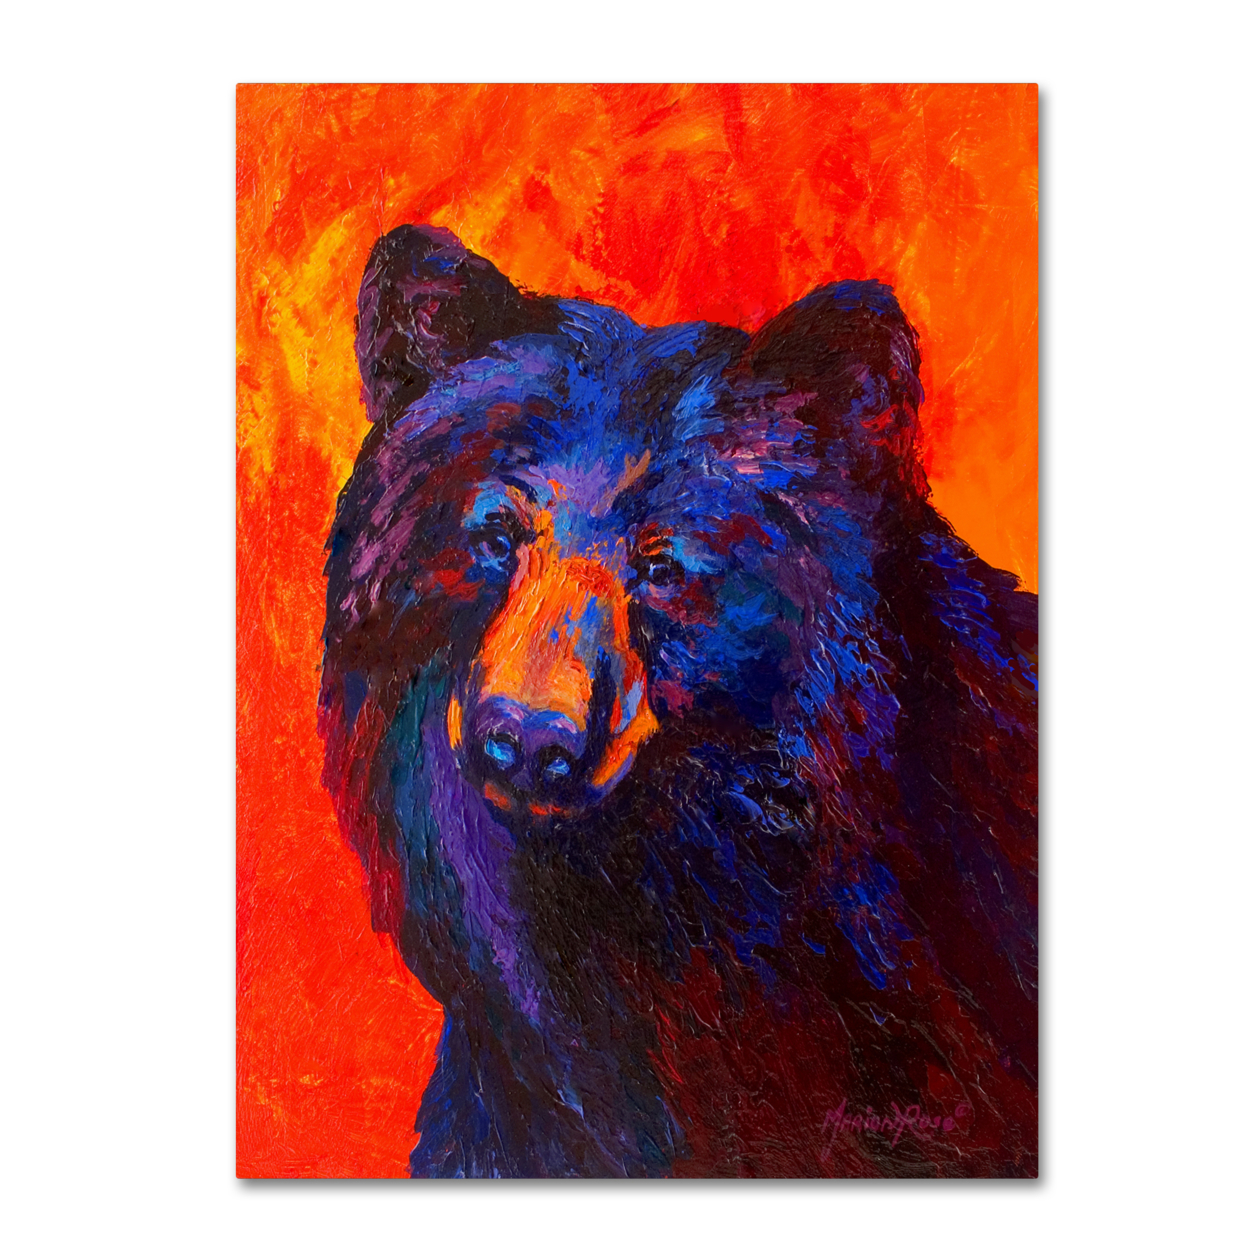 Marion Rose 'Thoughtful Black Bear' Ready To Hang Canvas Art 18 X 24 Inches Made In USA